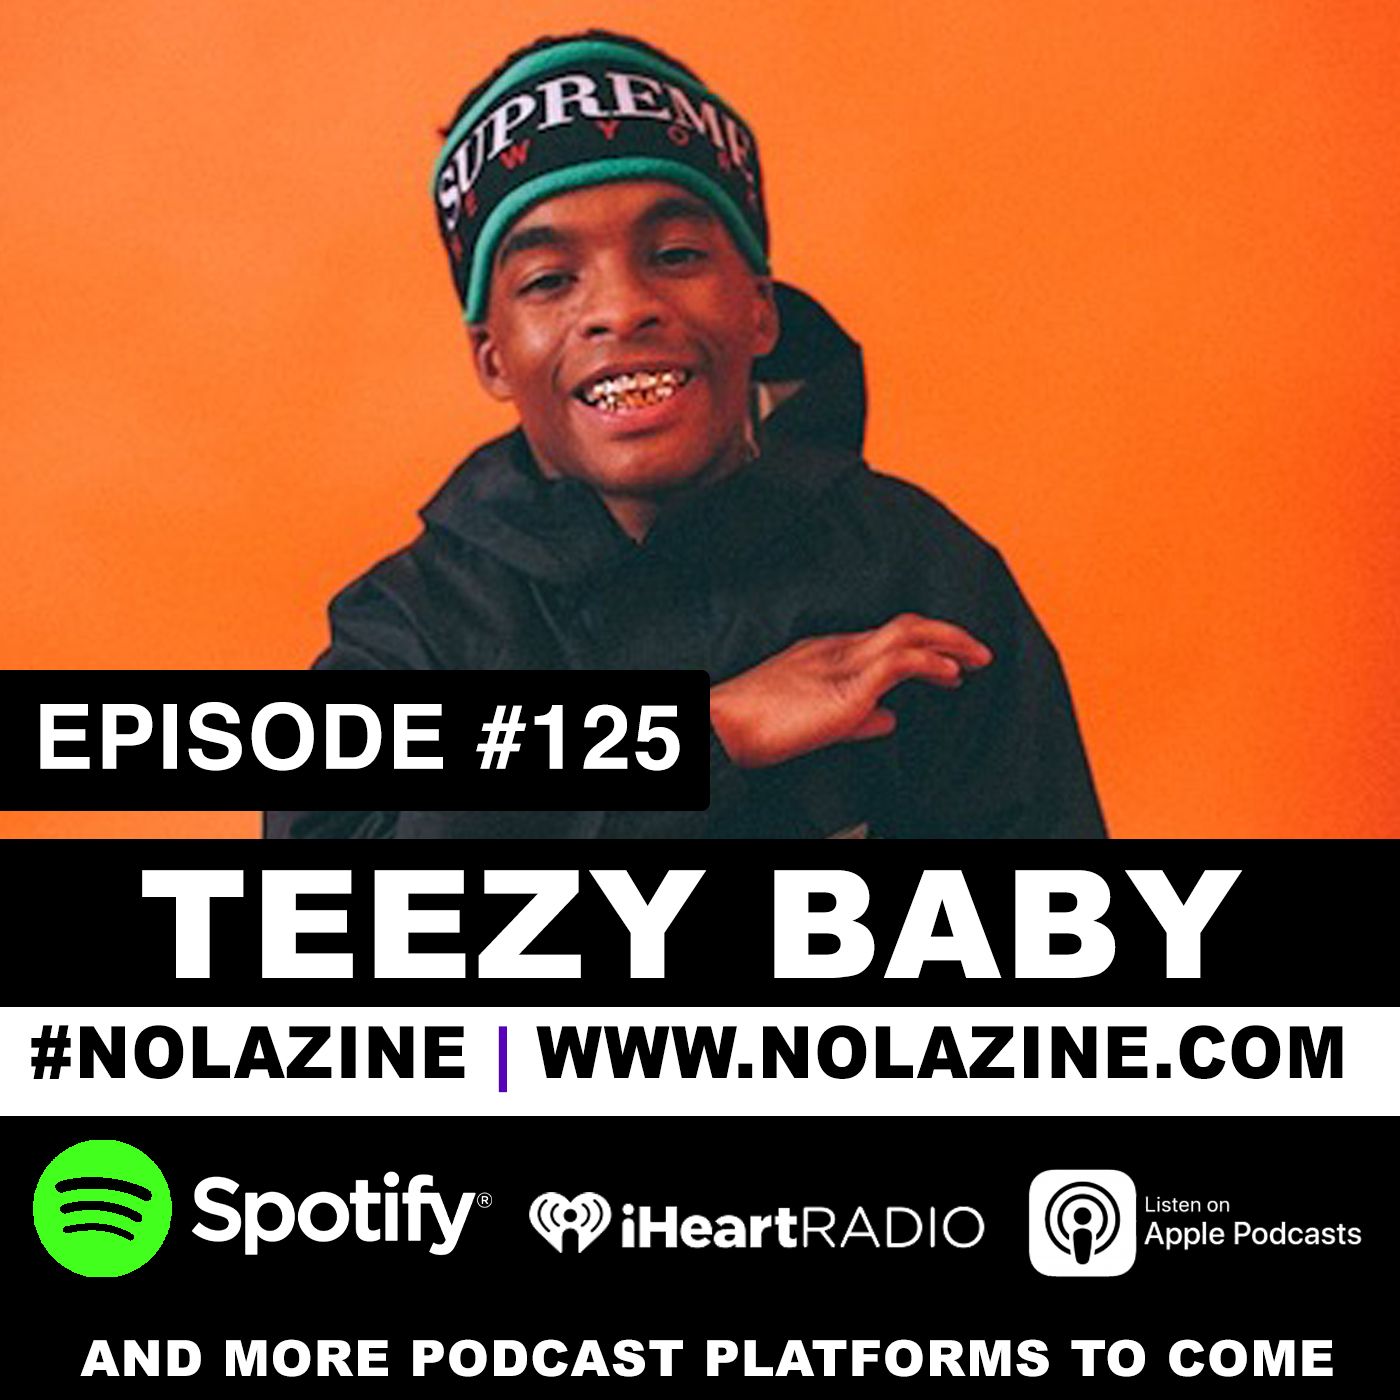 EP: 125 Featuring Teezy Baby